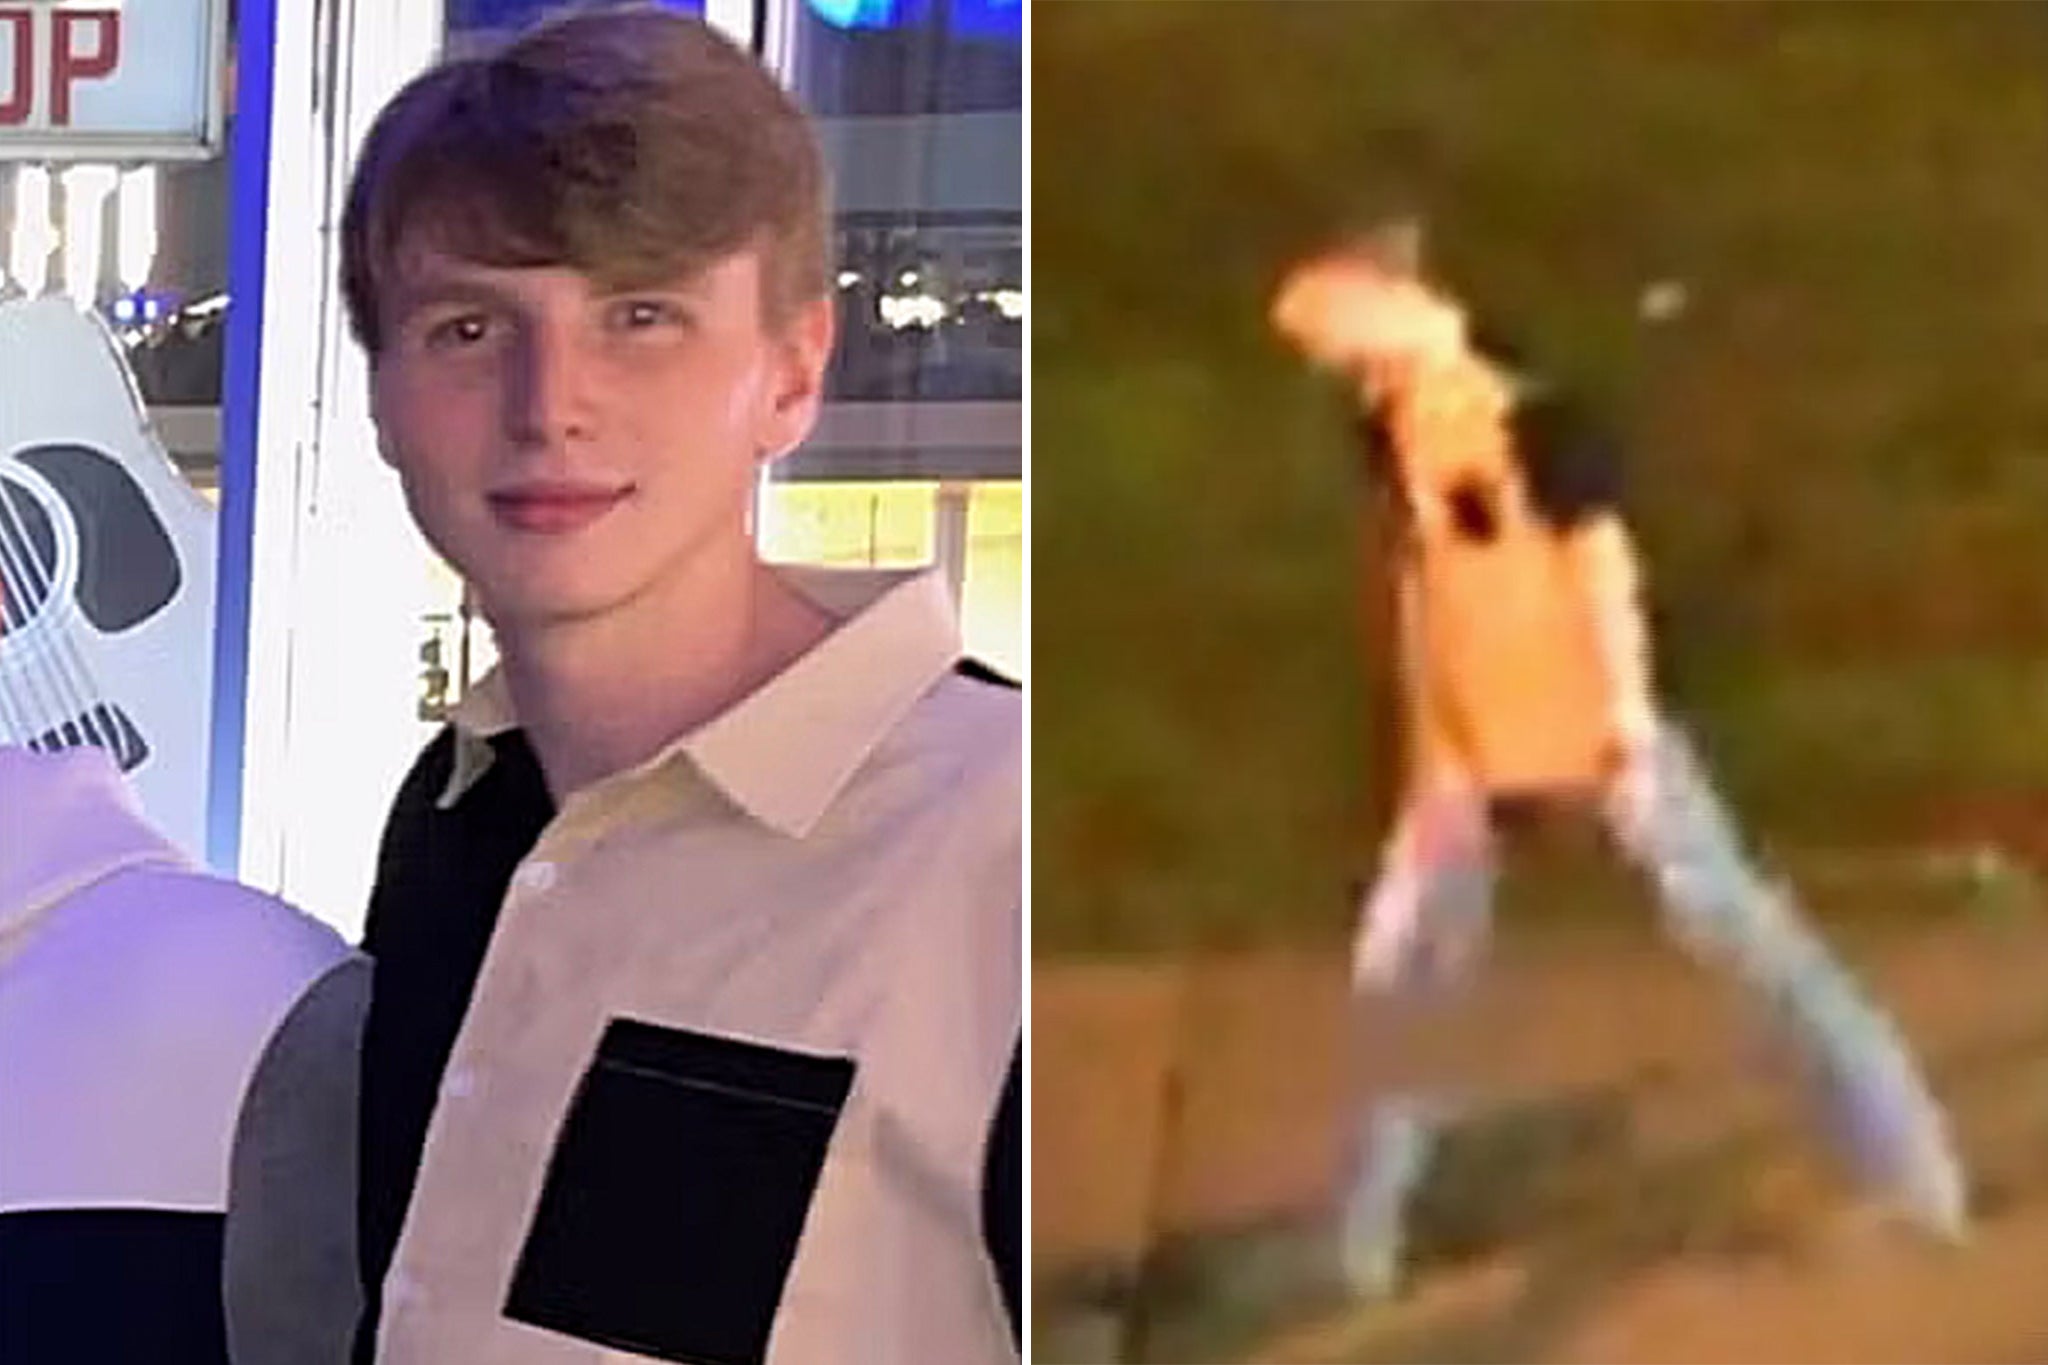 Riley strain was seen in CCTV footage stumbling as he crossed the road towards the Cumberland River